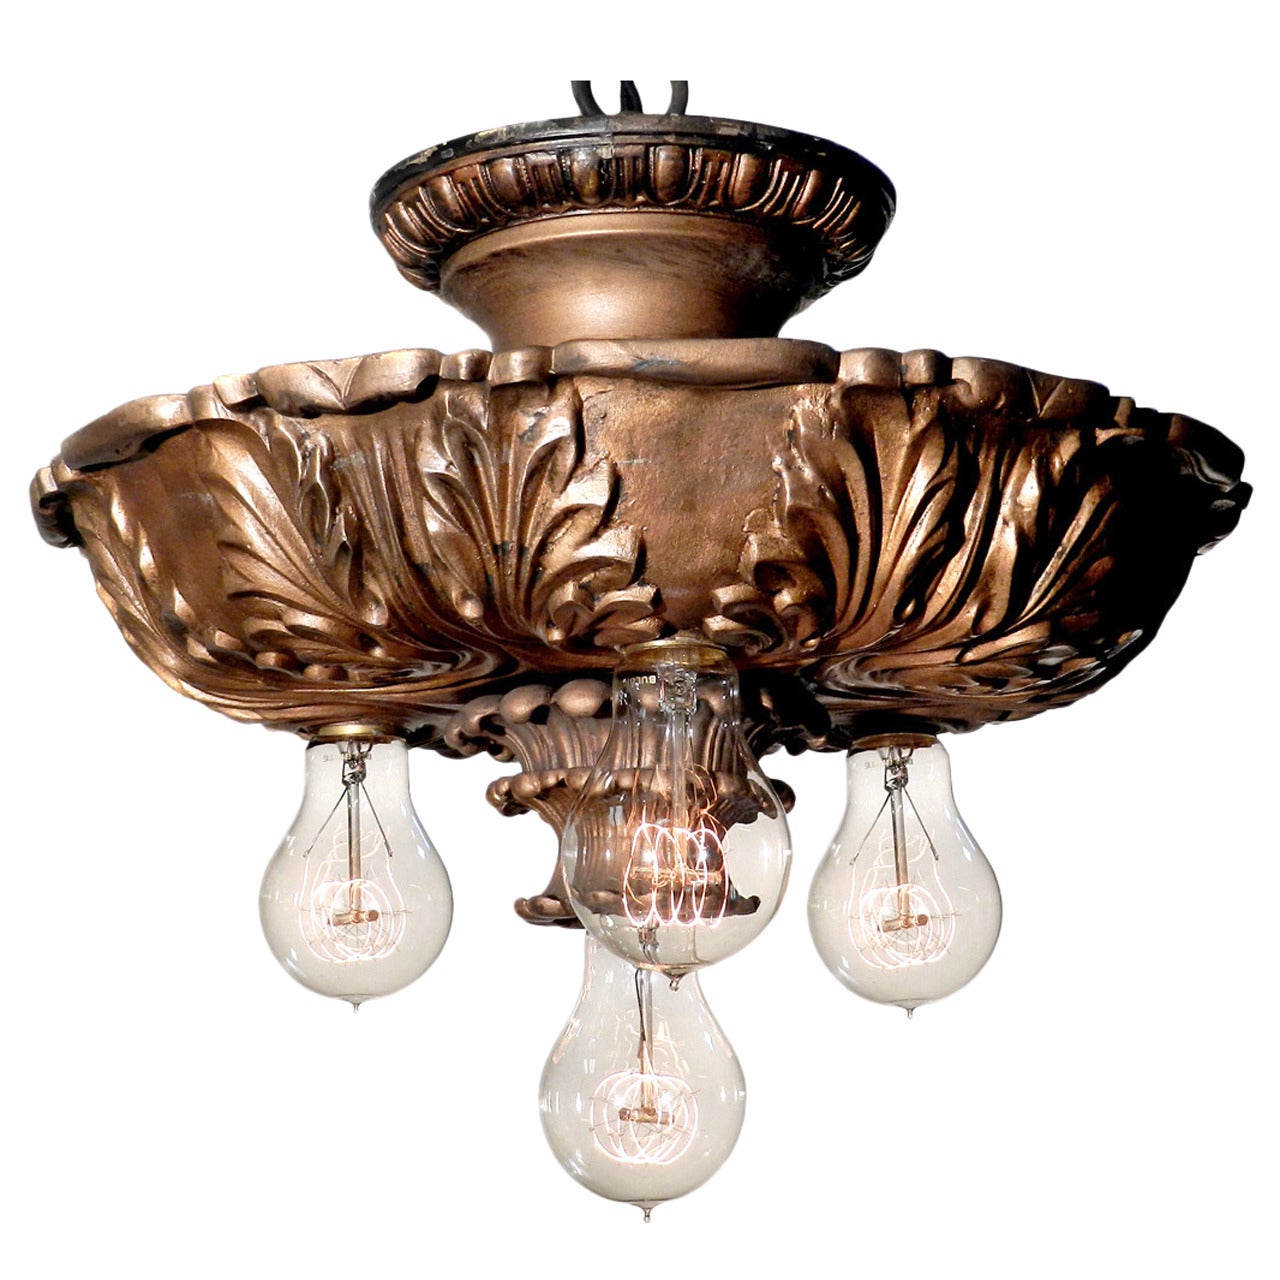 Solid Bronze Four-Bulb Theater Lamp